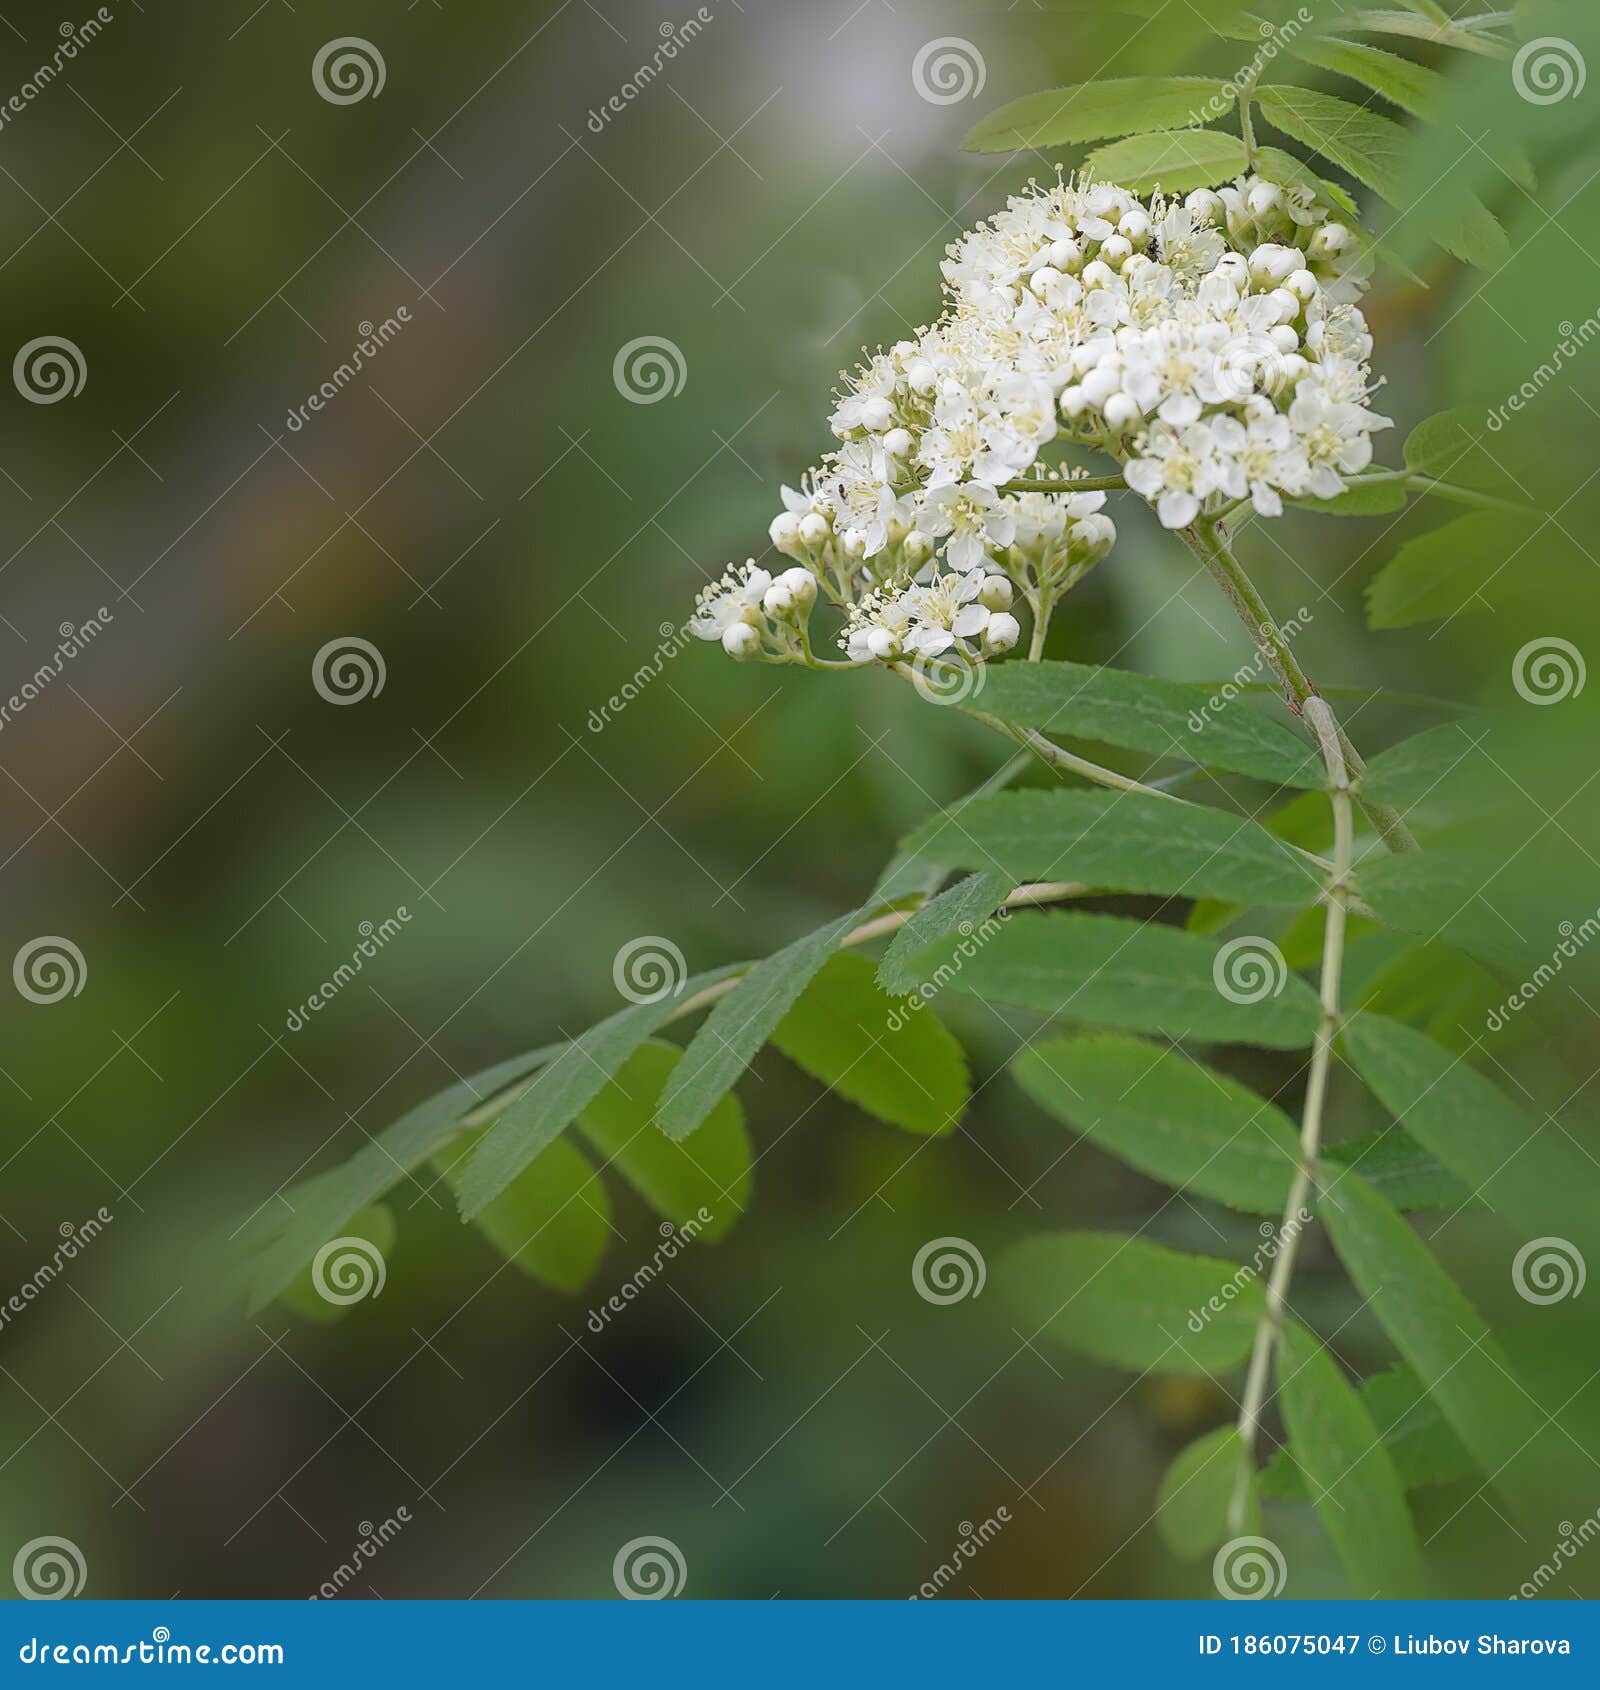 Blossoms Of A Rowan Tree, Sorbus Aucuparia, With Leaves. Sorbus ...